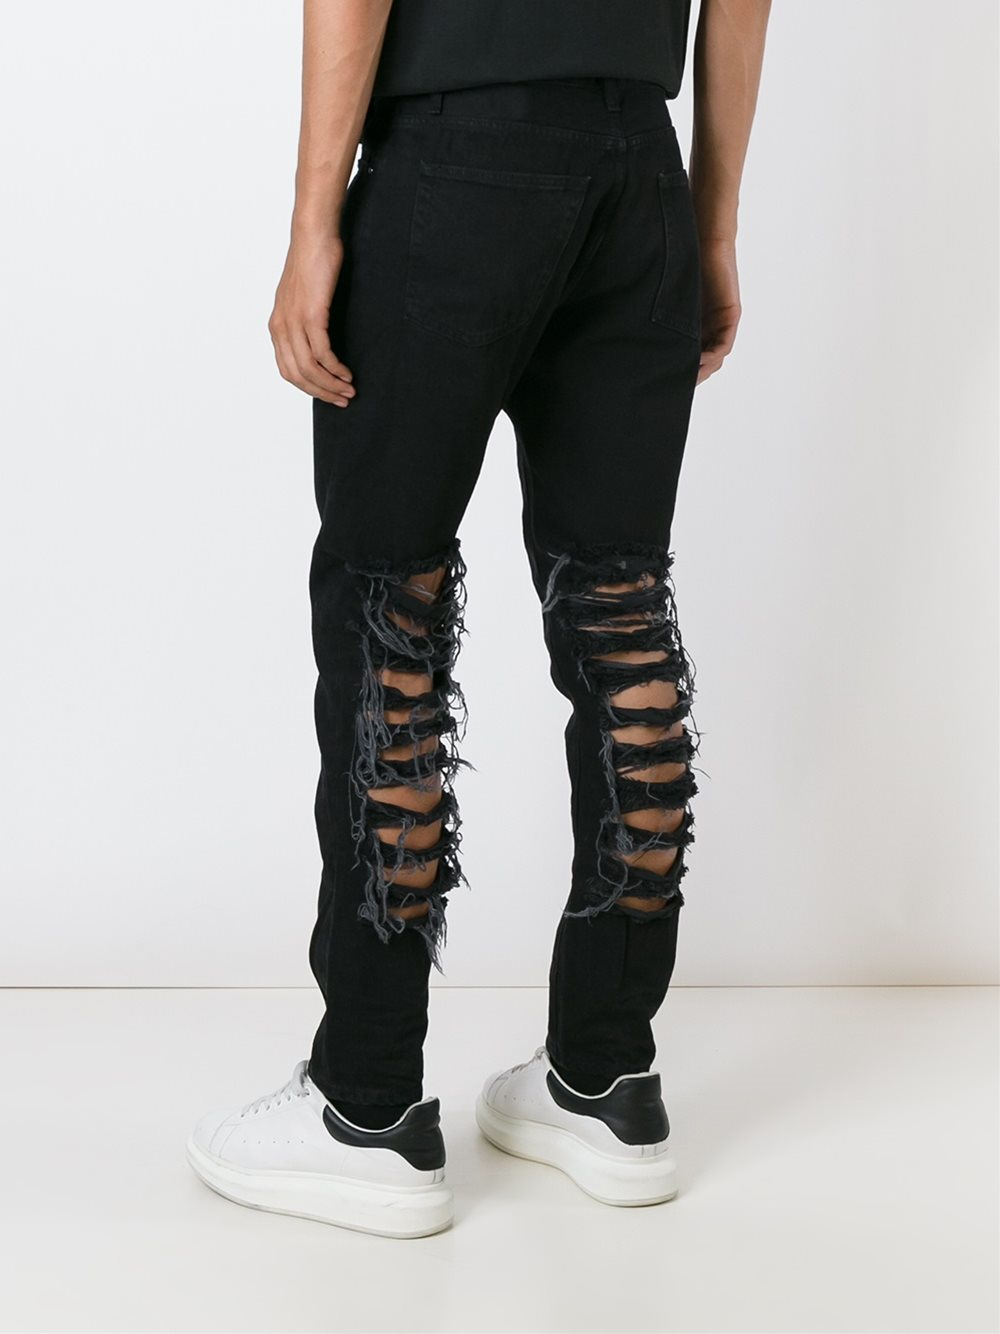 Lyst - Palm angels Distressed Jeans in Black for Men